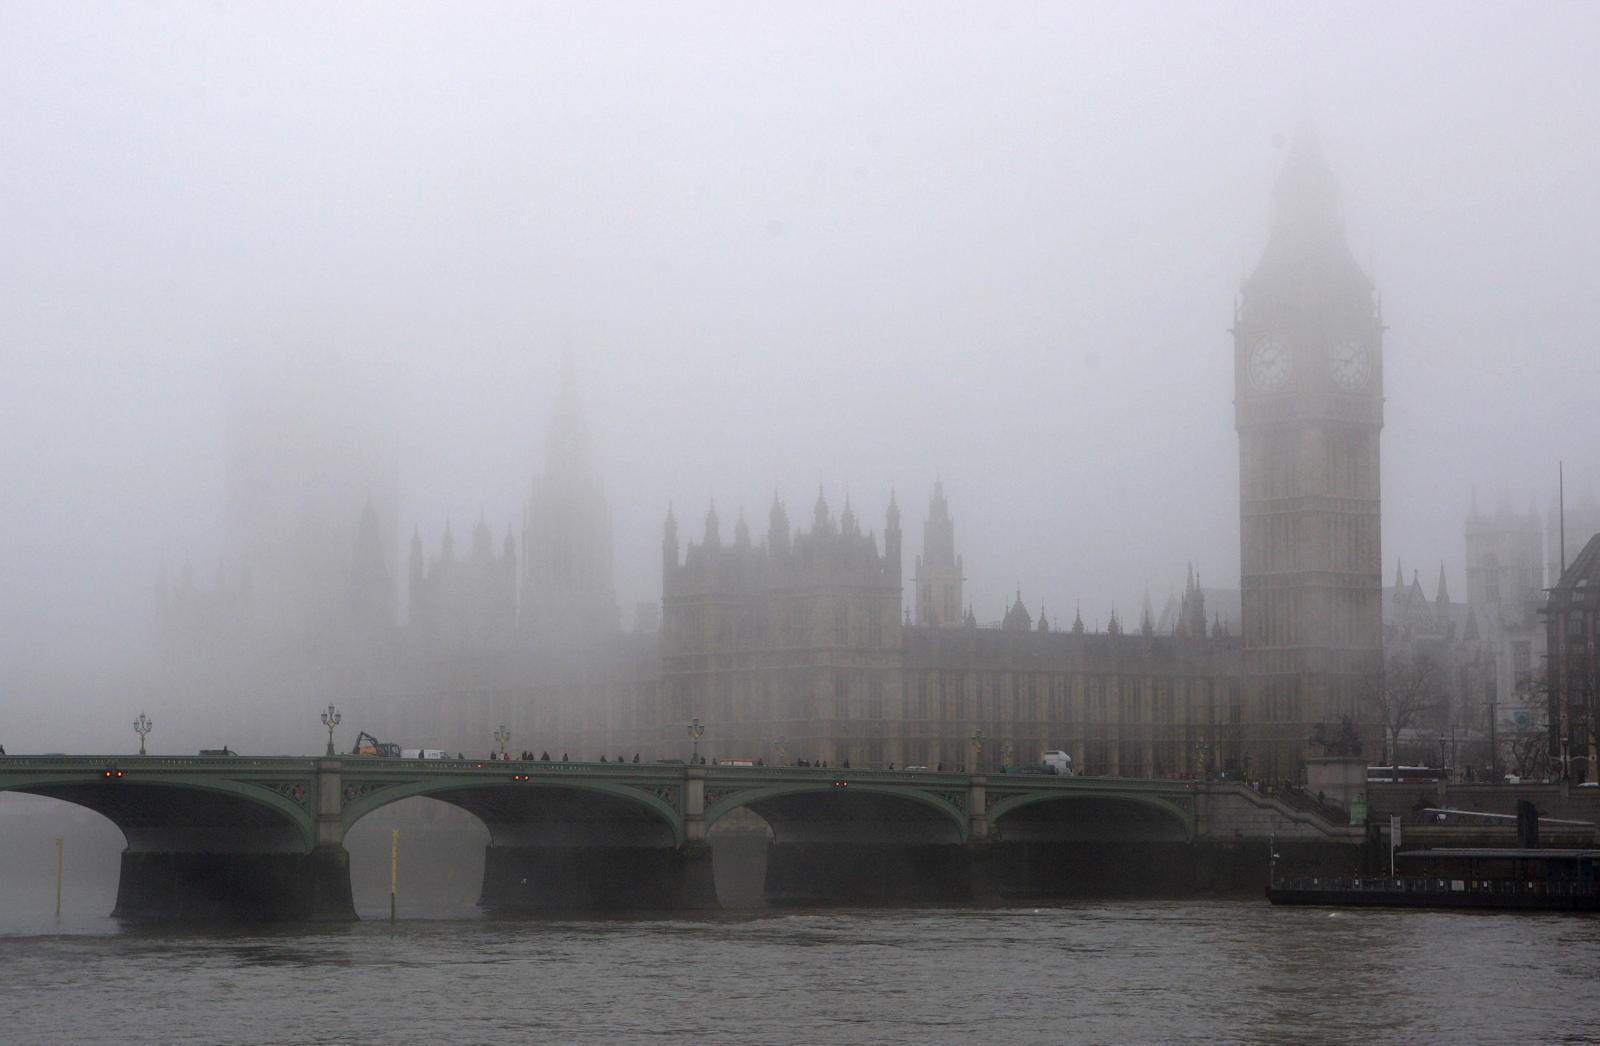 I’ll Be Gobsmacked If You Can Score at Least 15/20 on This Tricky Synonyms and Antonyms Quiz Foggy London